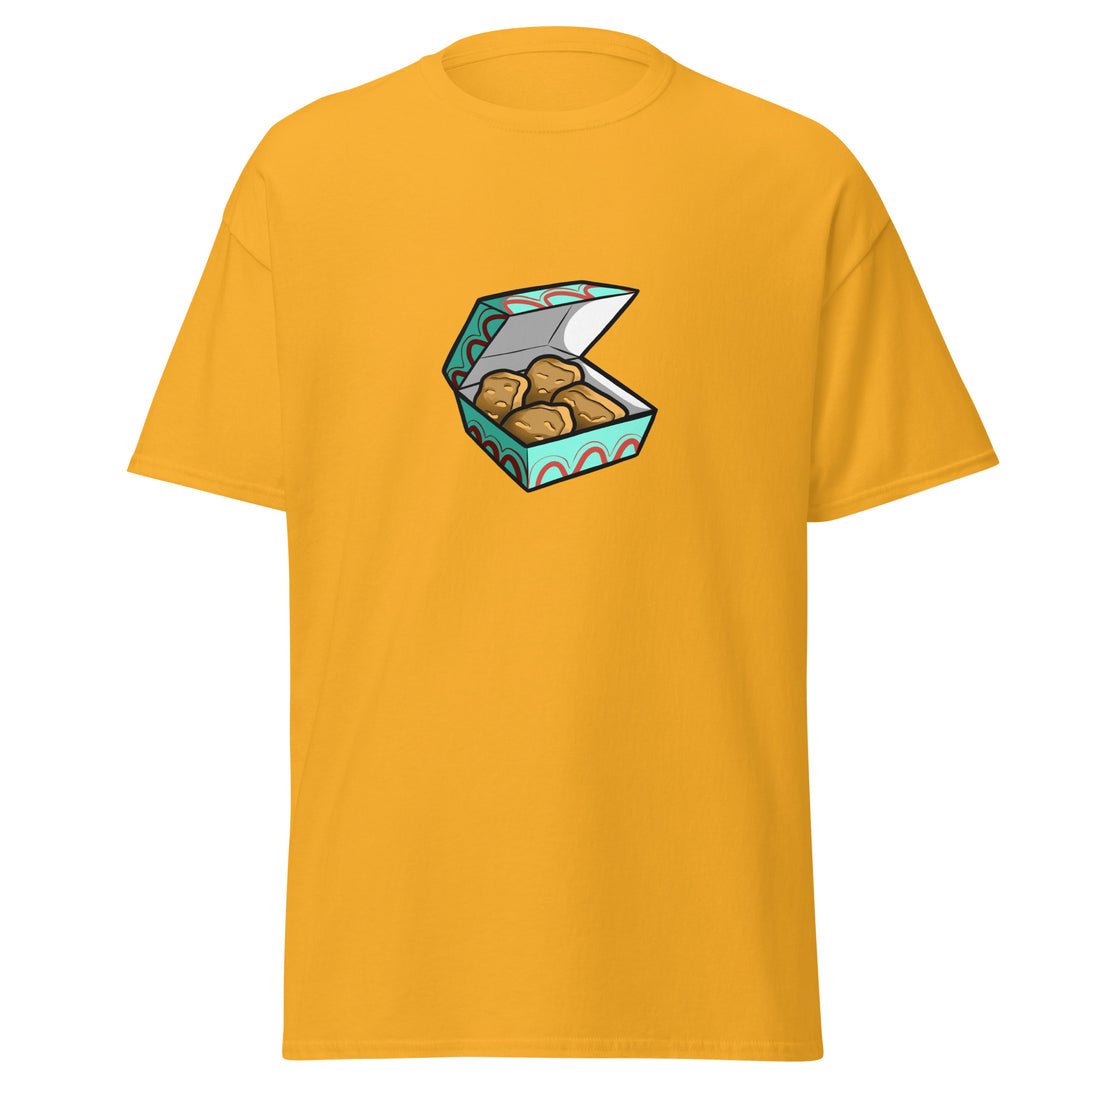 Nuggets Box Masterpiece: Unleash Your Gaming Persona with This Vibrant Yellow Gamer's T-Shirt!